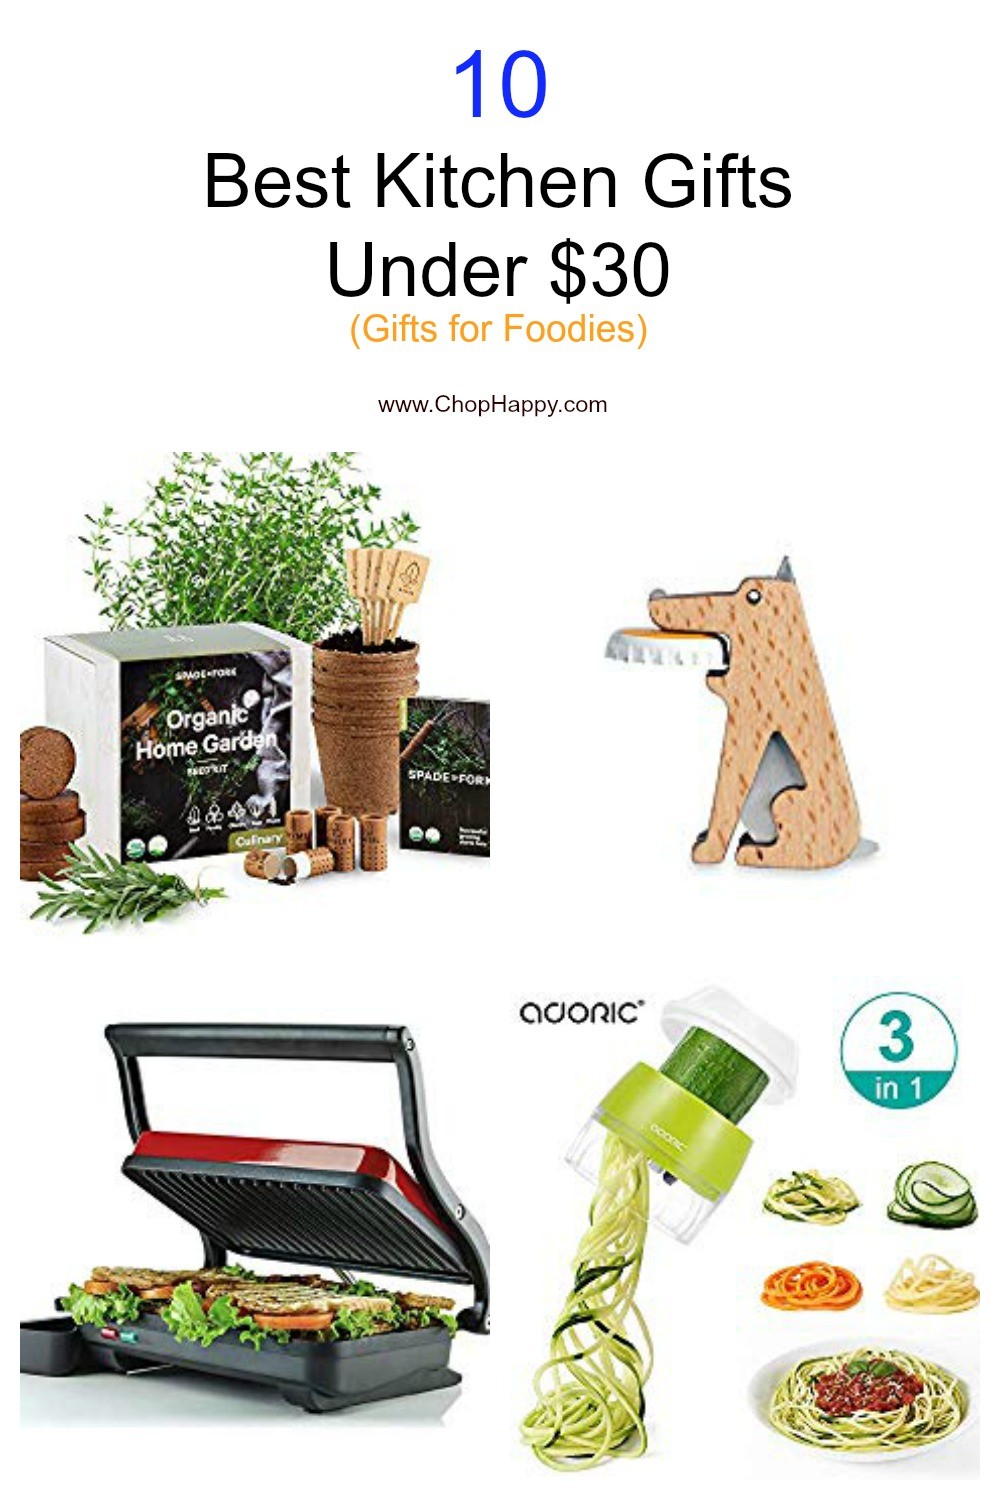 10 Best Kitchen Gifts Under $30 (Gifts for Foodies). Christmas, Hanukkah, birthday, or just because. Thease are the perfect gifts for a home cook. #kitchentools #foodiegift